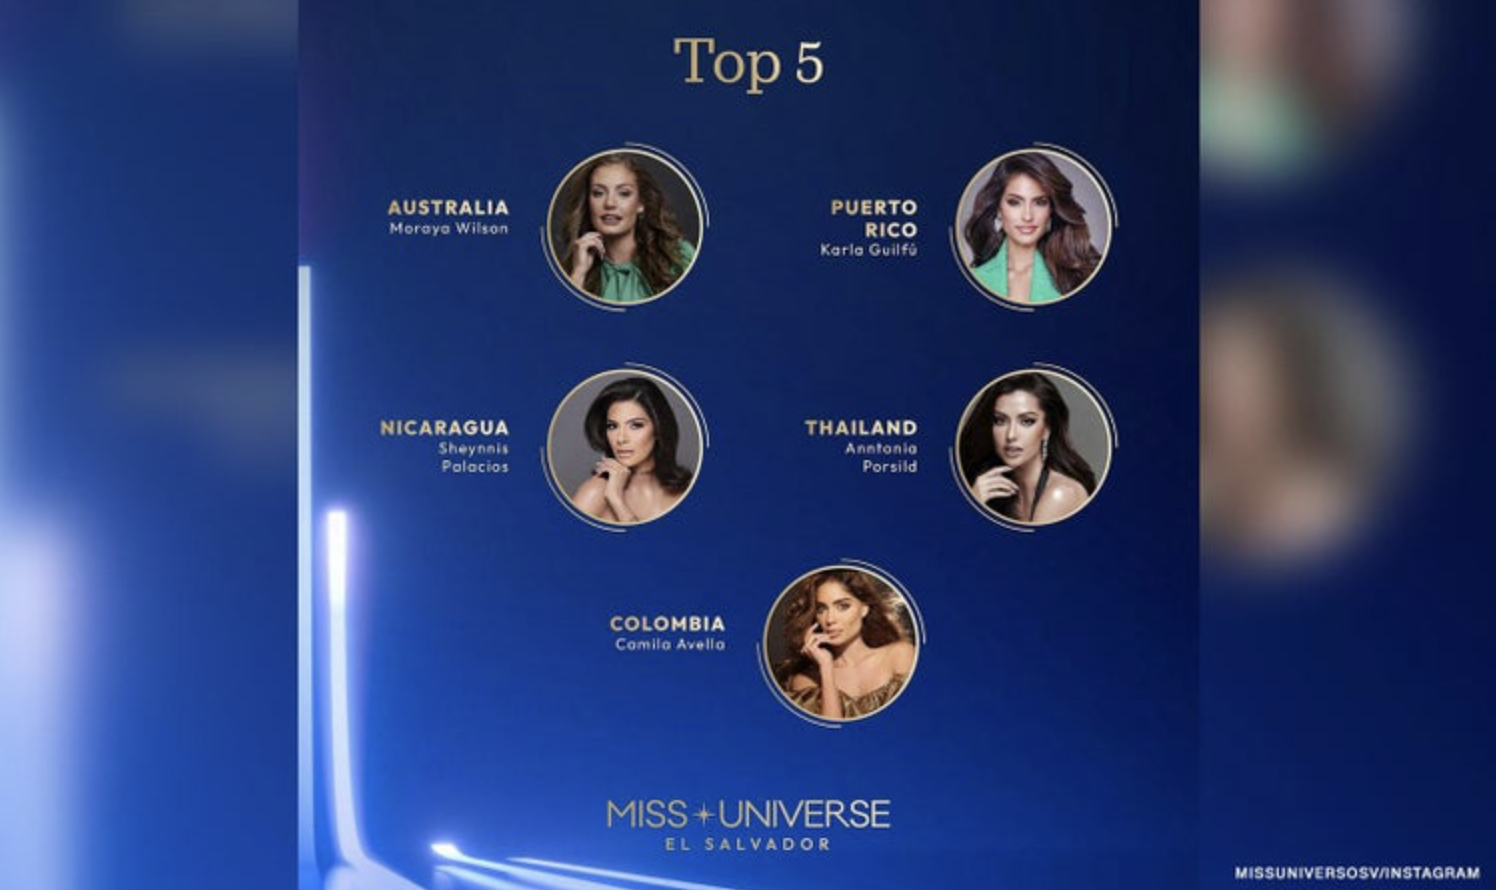 Can we talk about that Steve Harvey moment? A pageant expert is seeking an explanation for the Miss Universe Top 5 graphics mix-up.